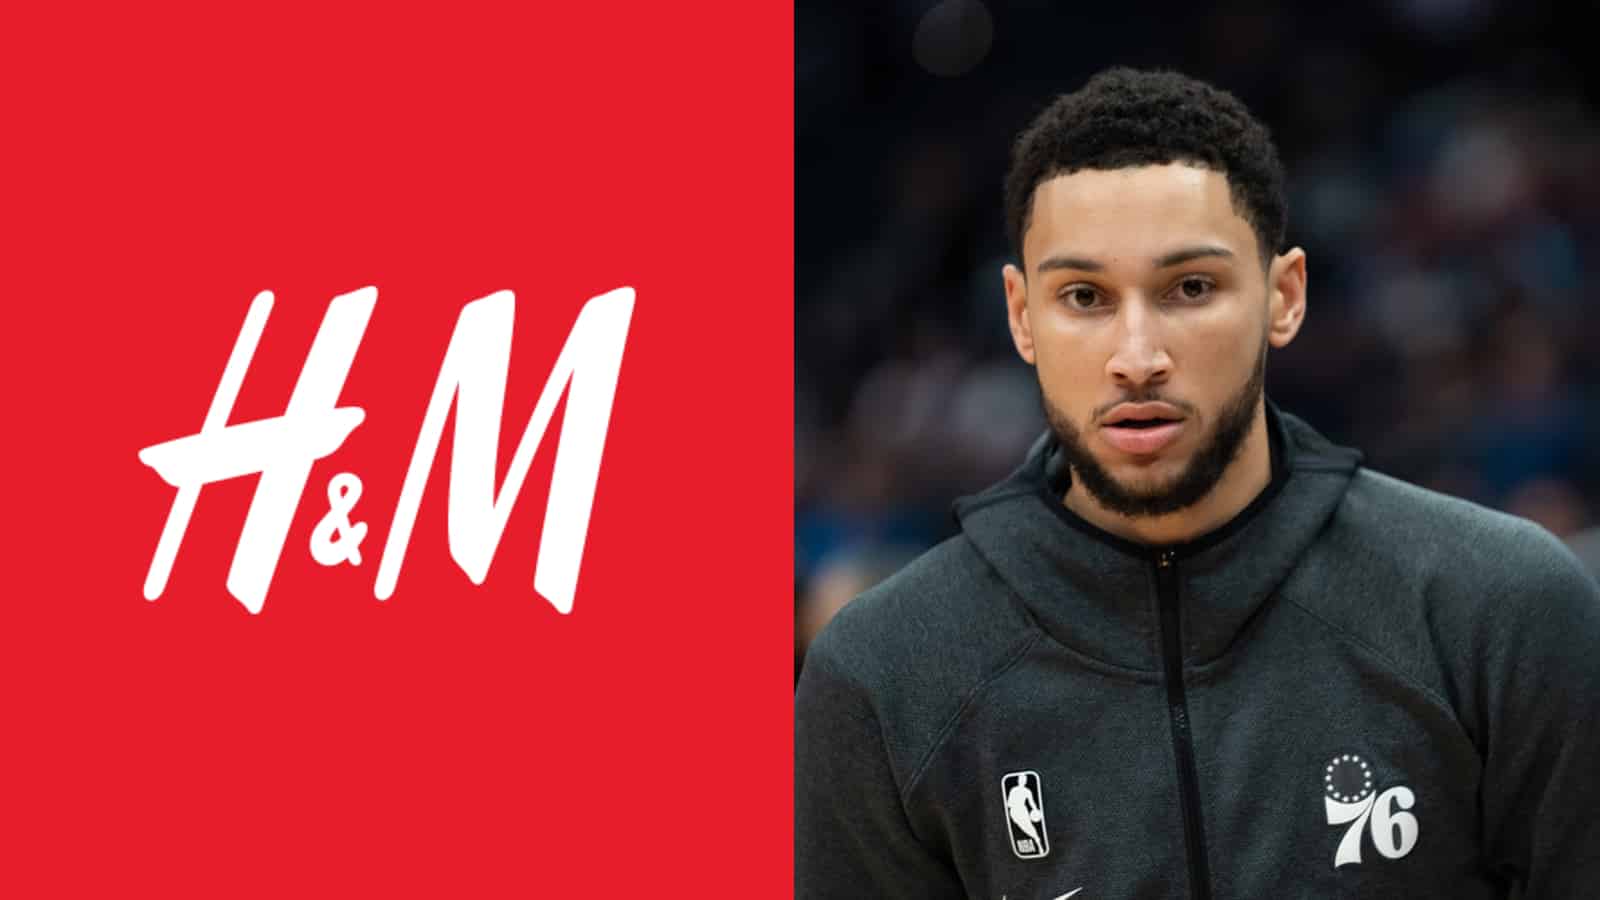 H&M logo and Ben Simmons